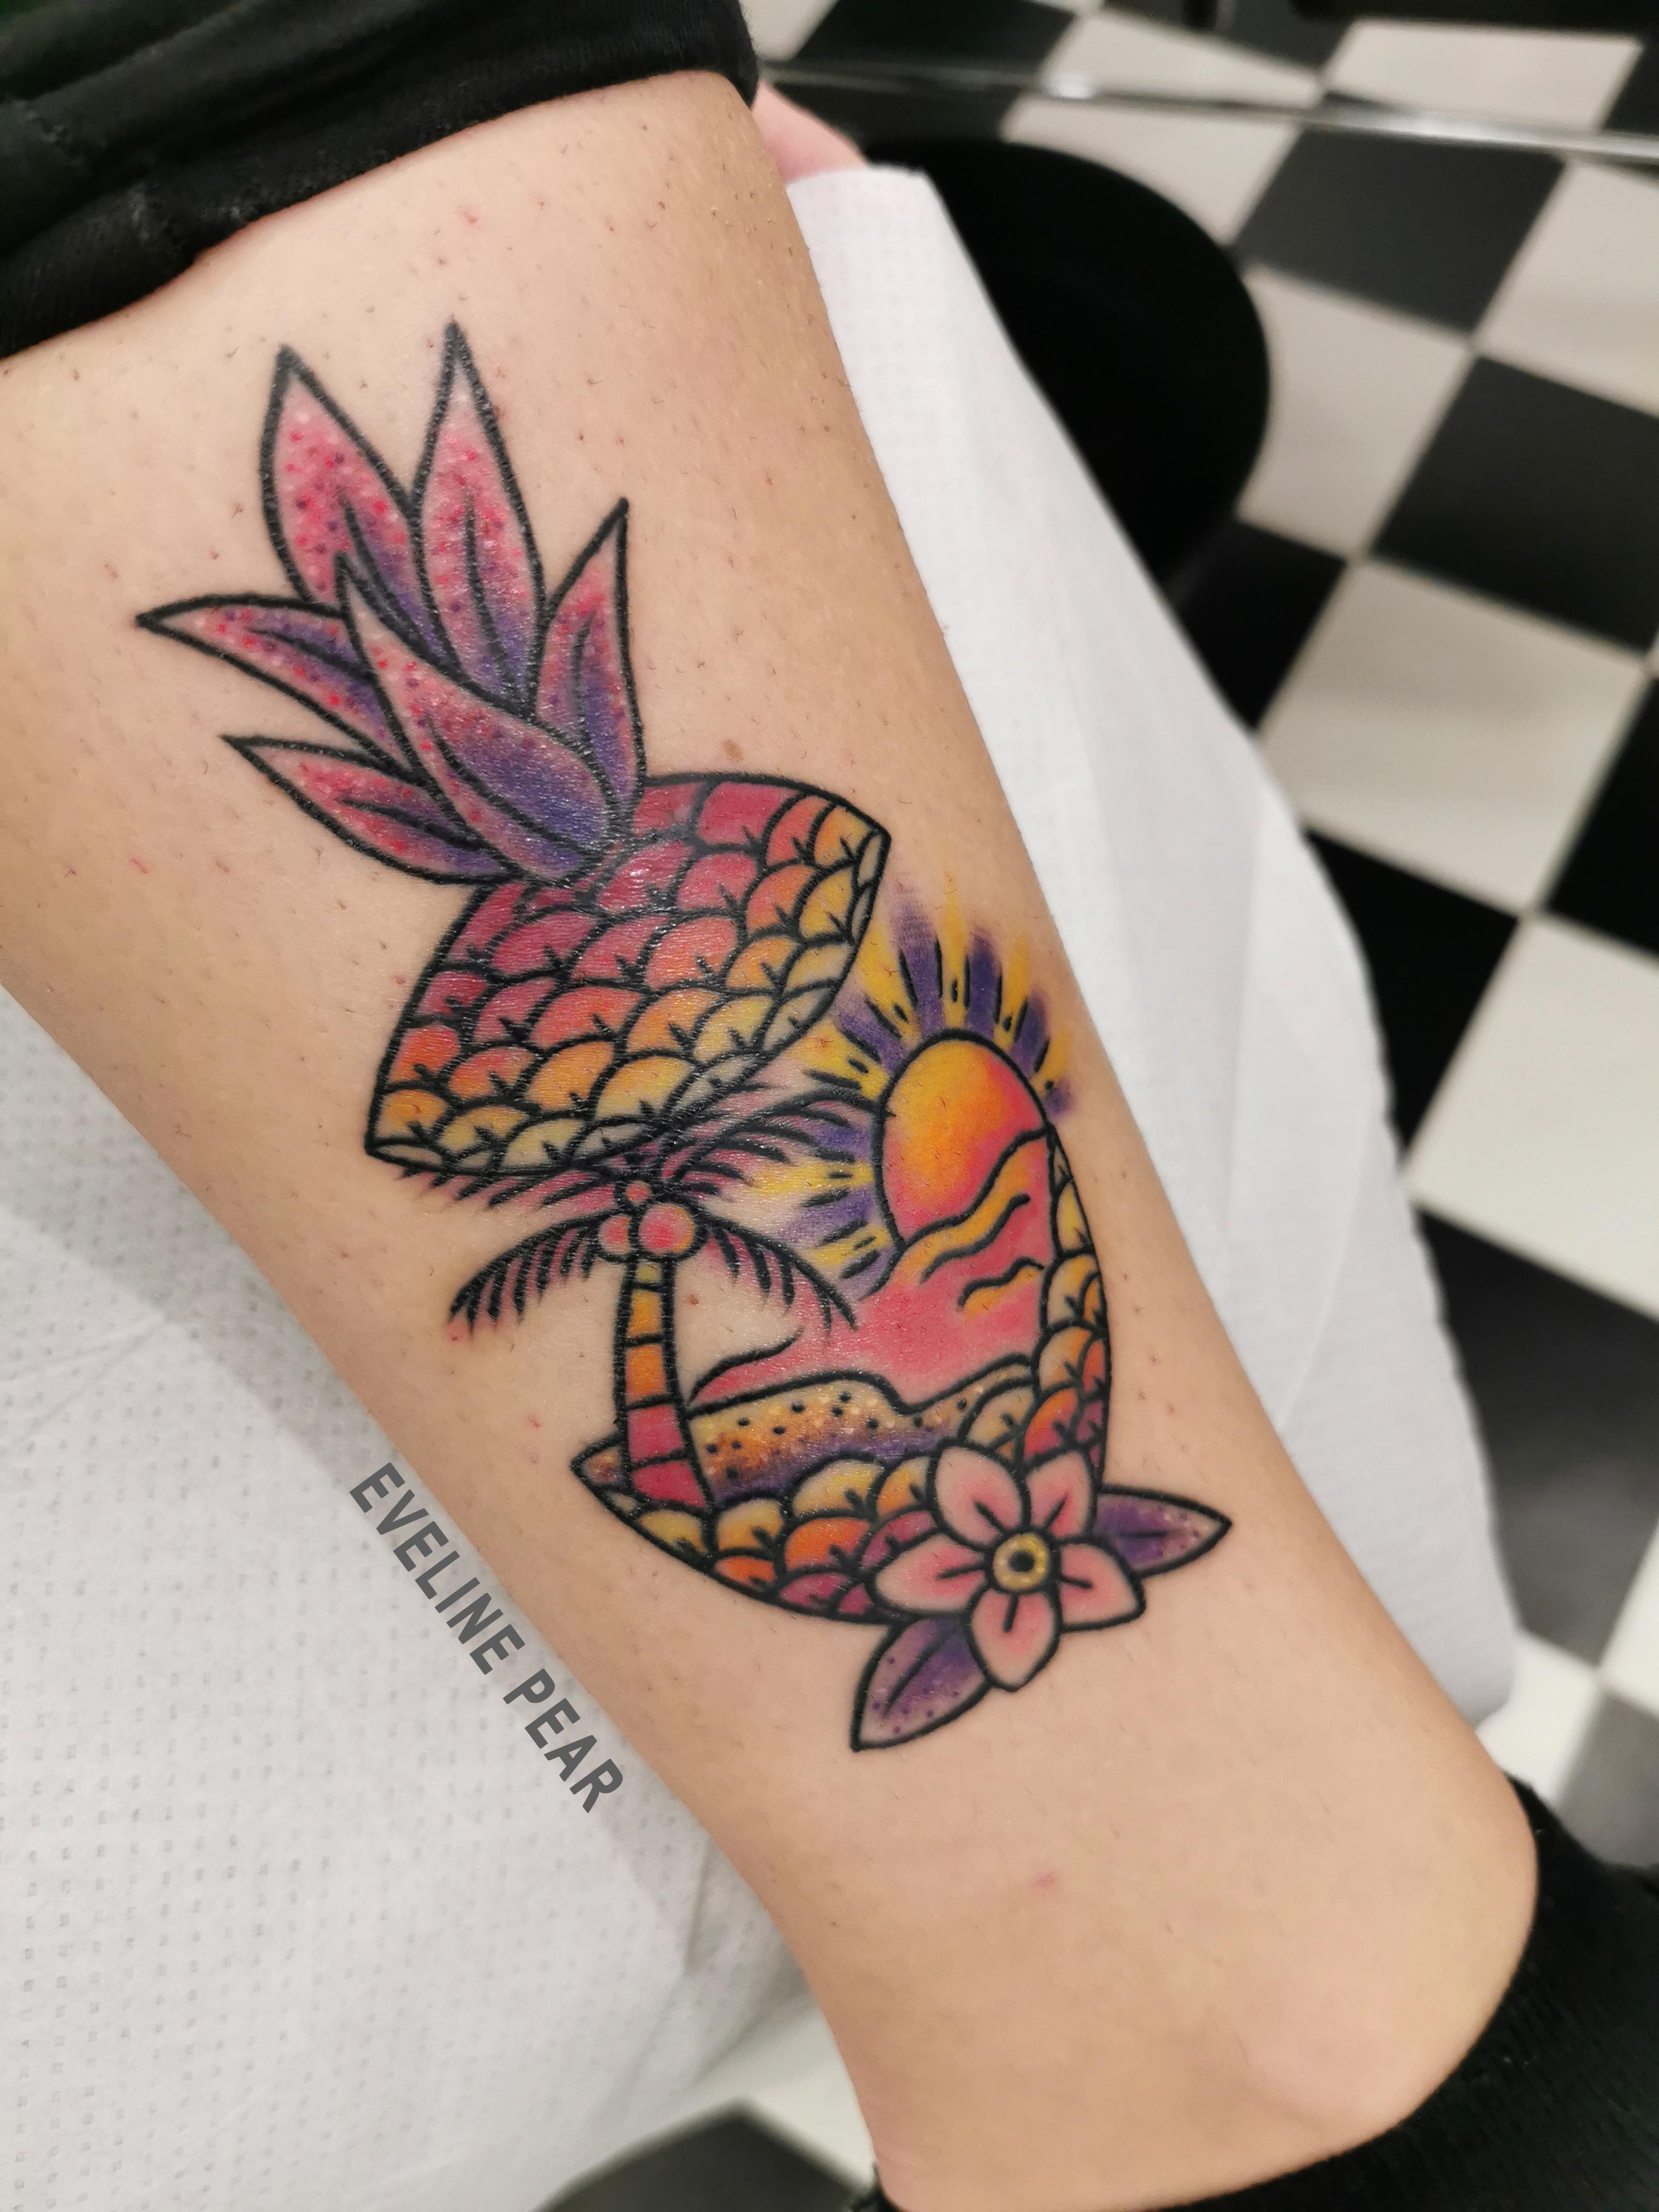 Inksearch tattoo Eveline Pear Ink